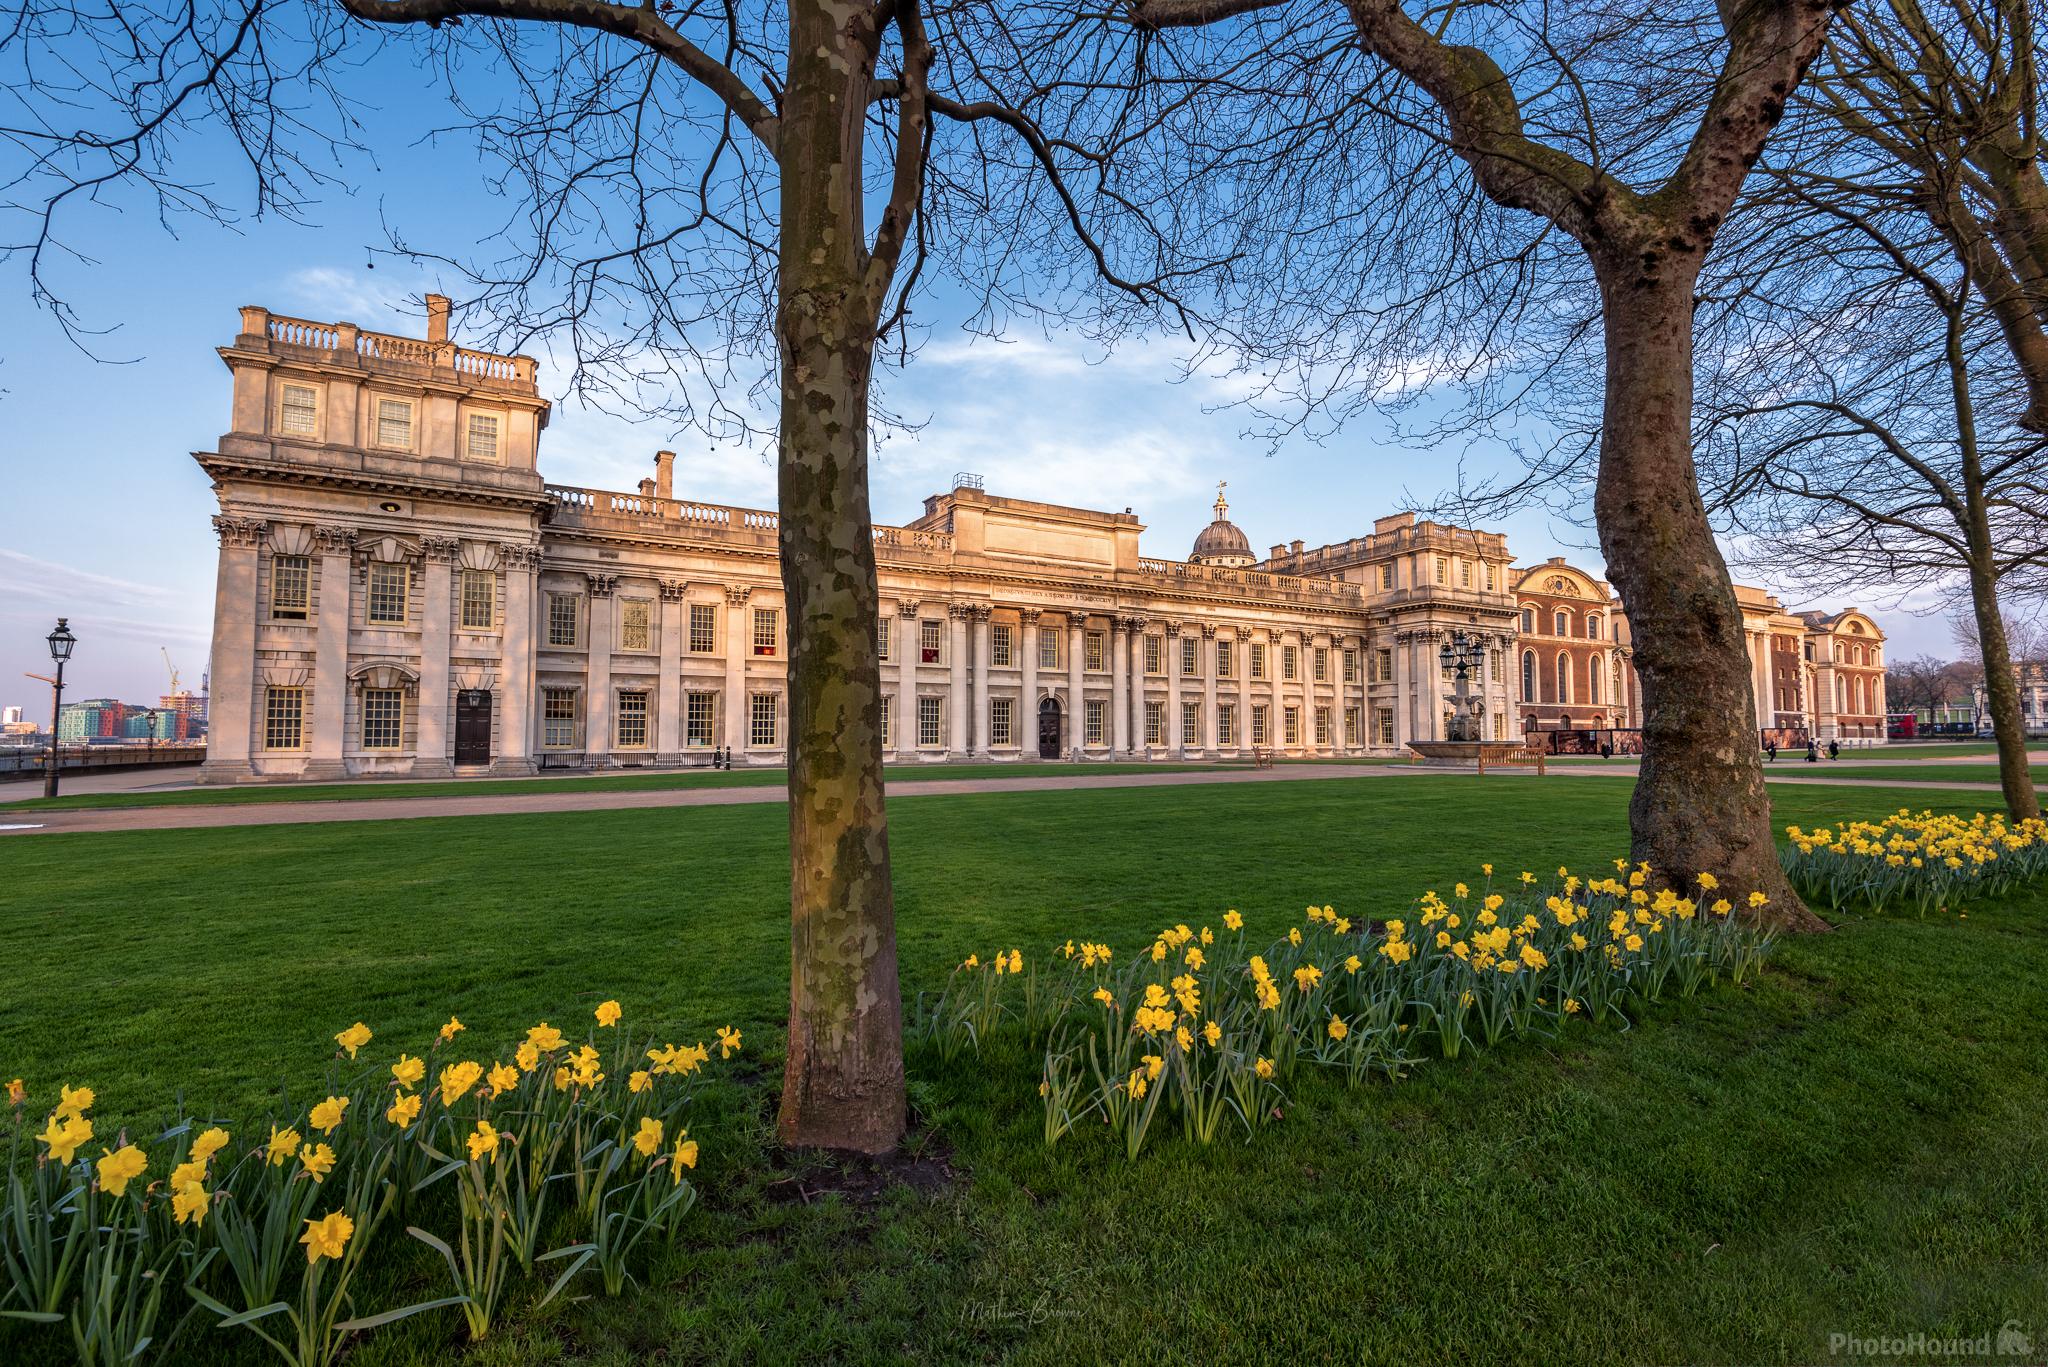 Image of Naval College Gardens by Mathew Browne